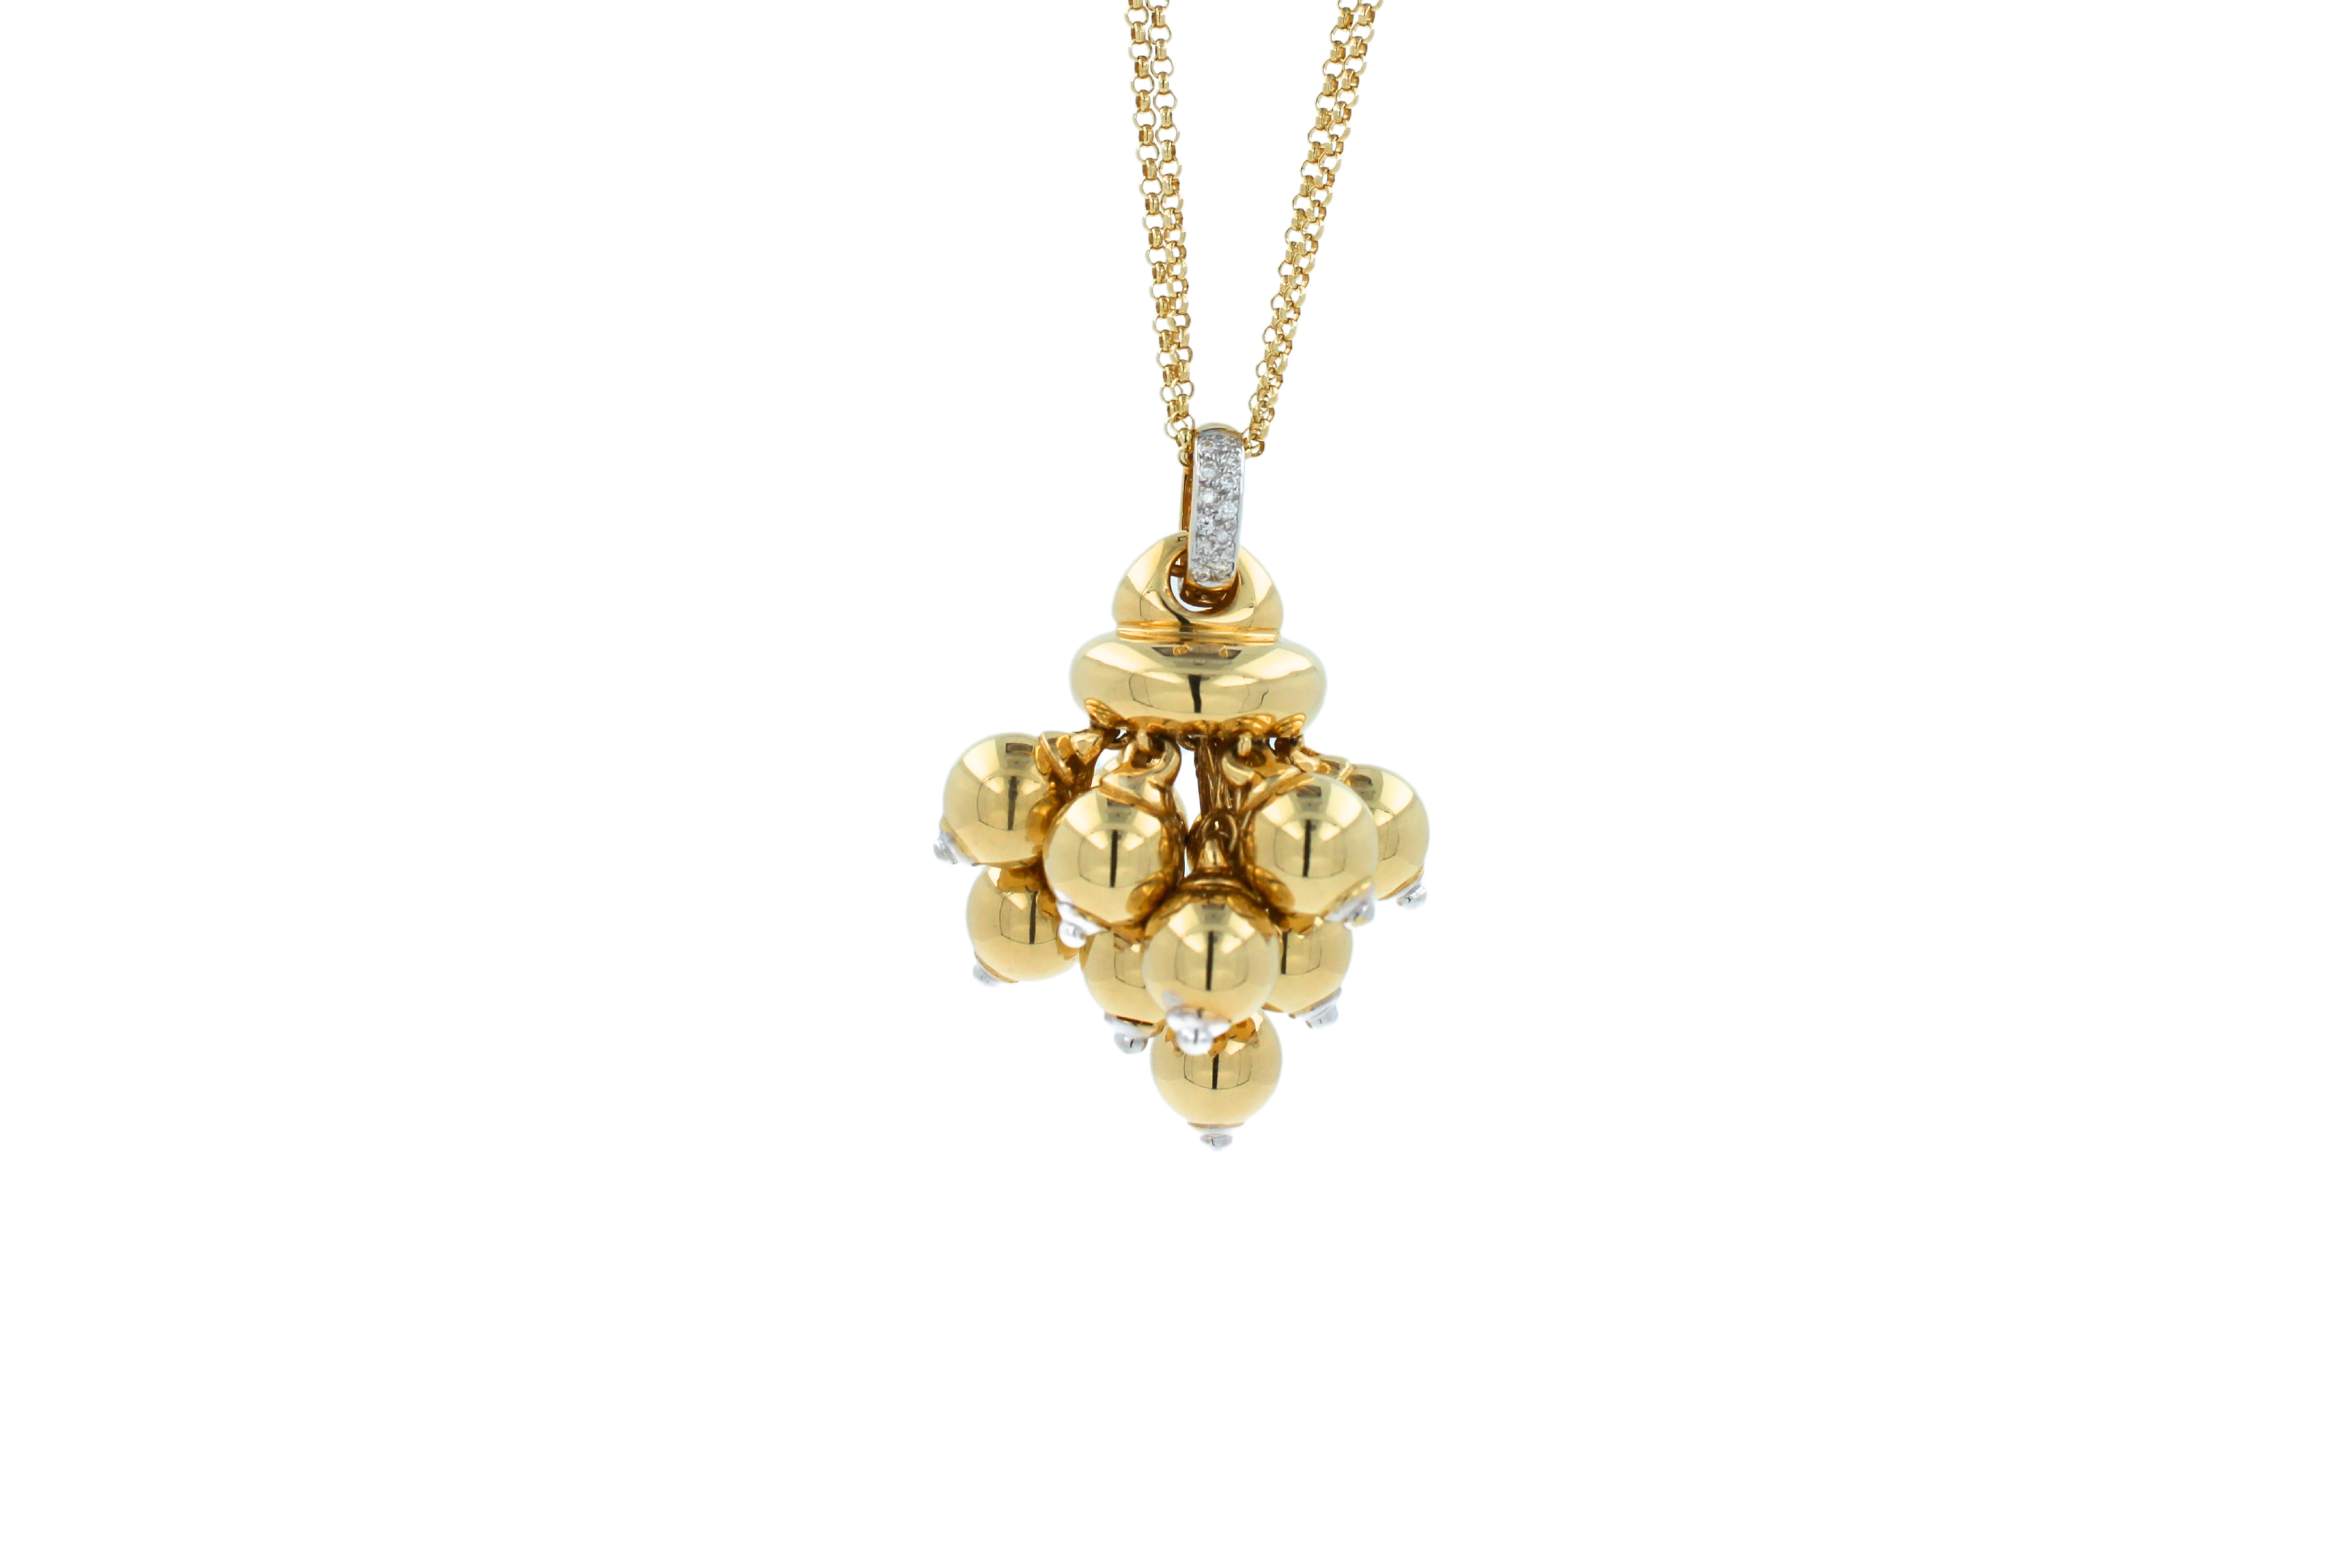 Very Beautiful, Unique, High-End Craftmanship with a polished finish. A versatile high-luxury fine pendant necklace that can be worn with any outfit.
26.20 grams 
18K Yellow Gold & 18K White Gold Details 
Double Rolo Chain - 1.5mm width - 20.5